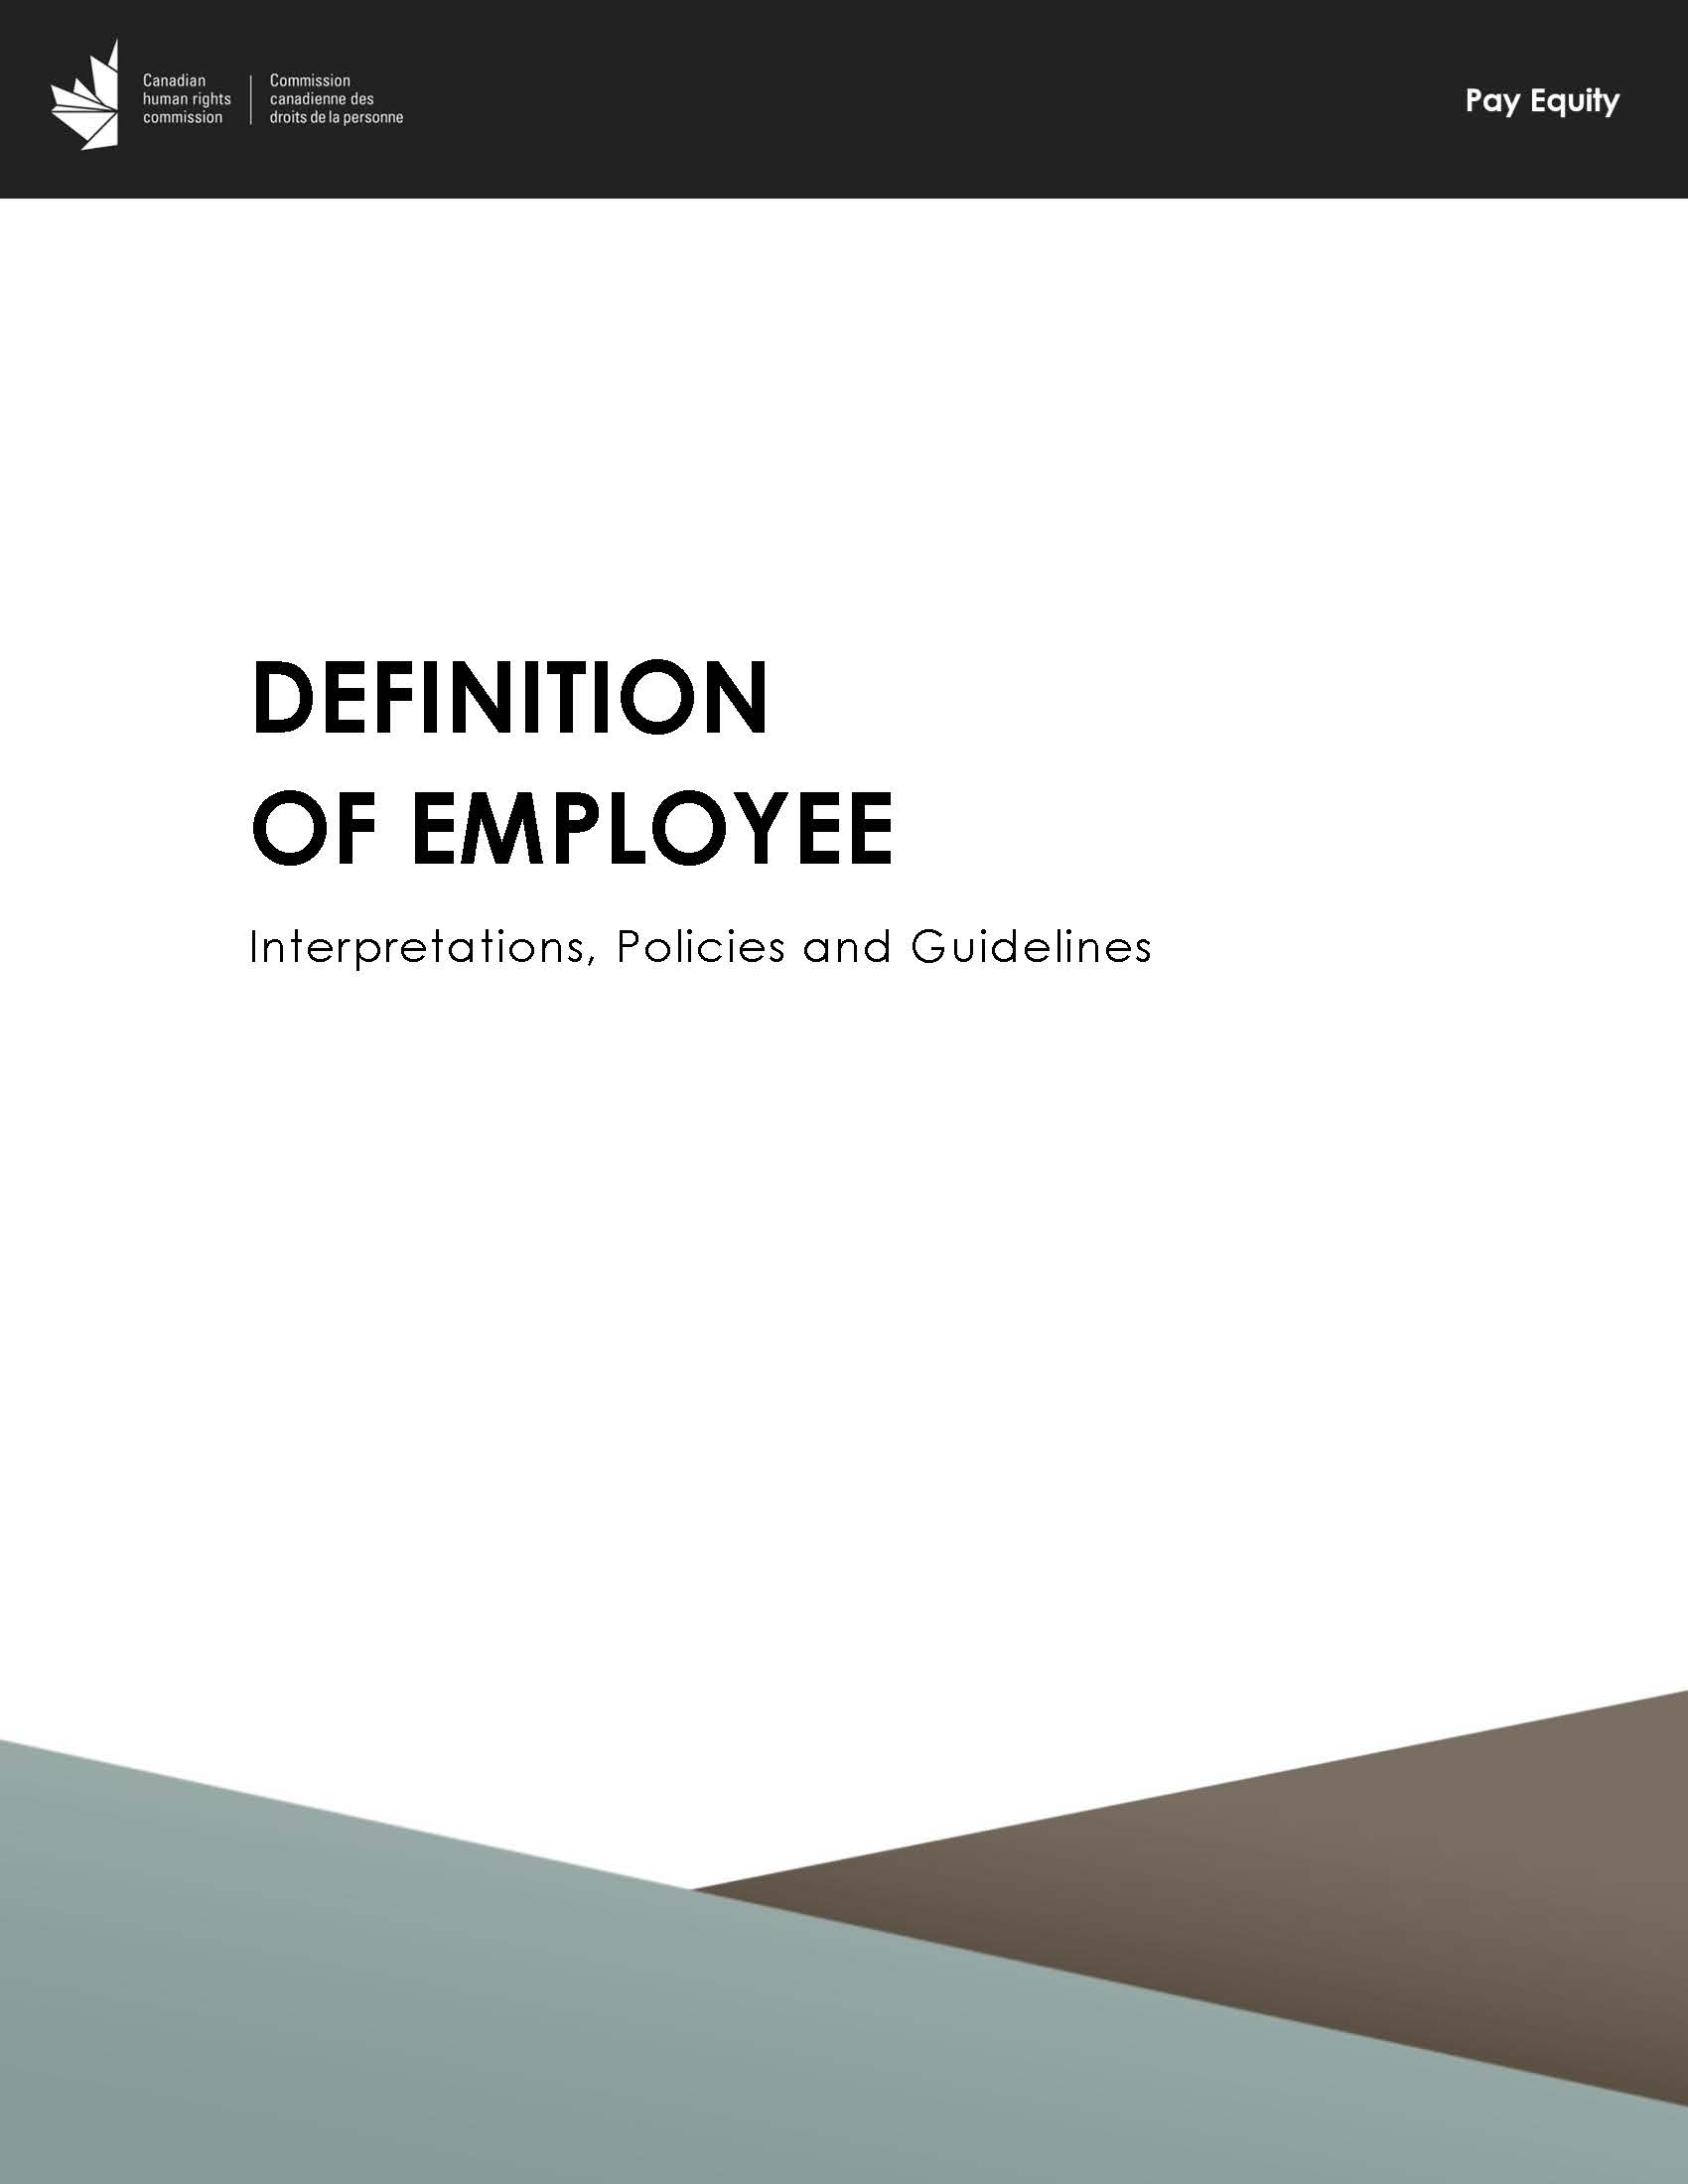 Definition of Employee - Interpretations, Policies and Guidelines